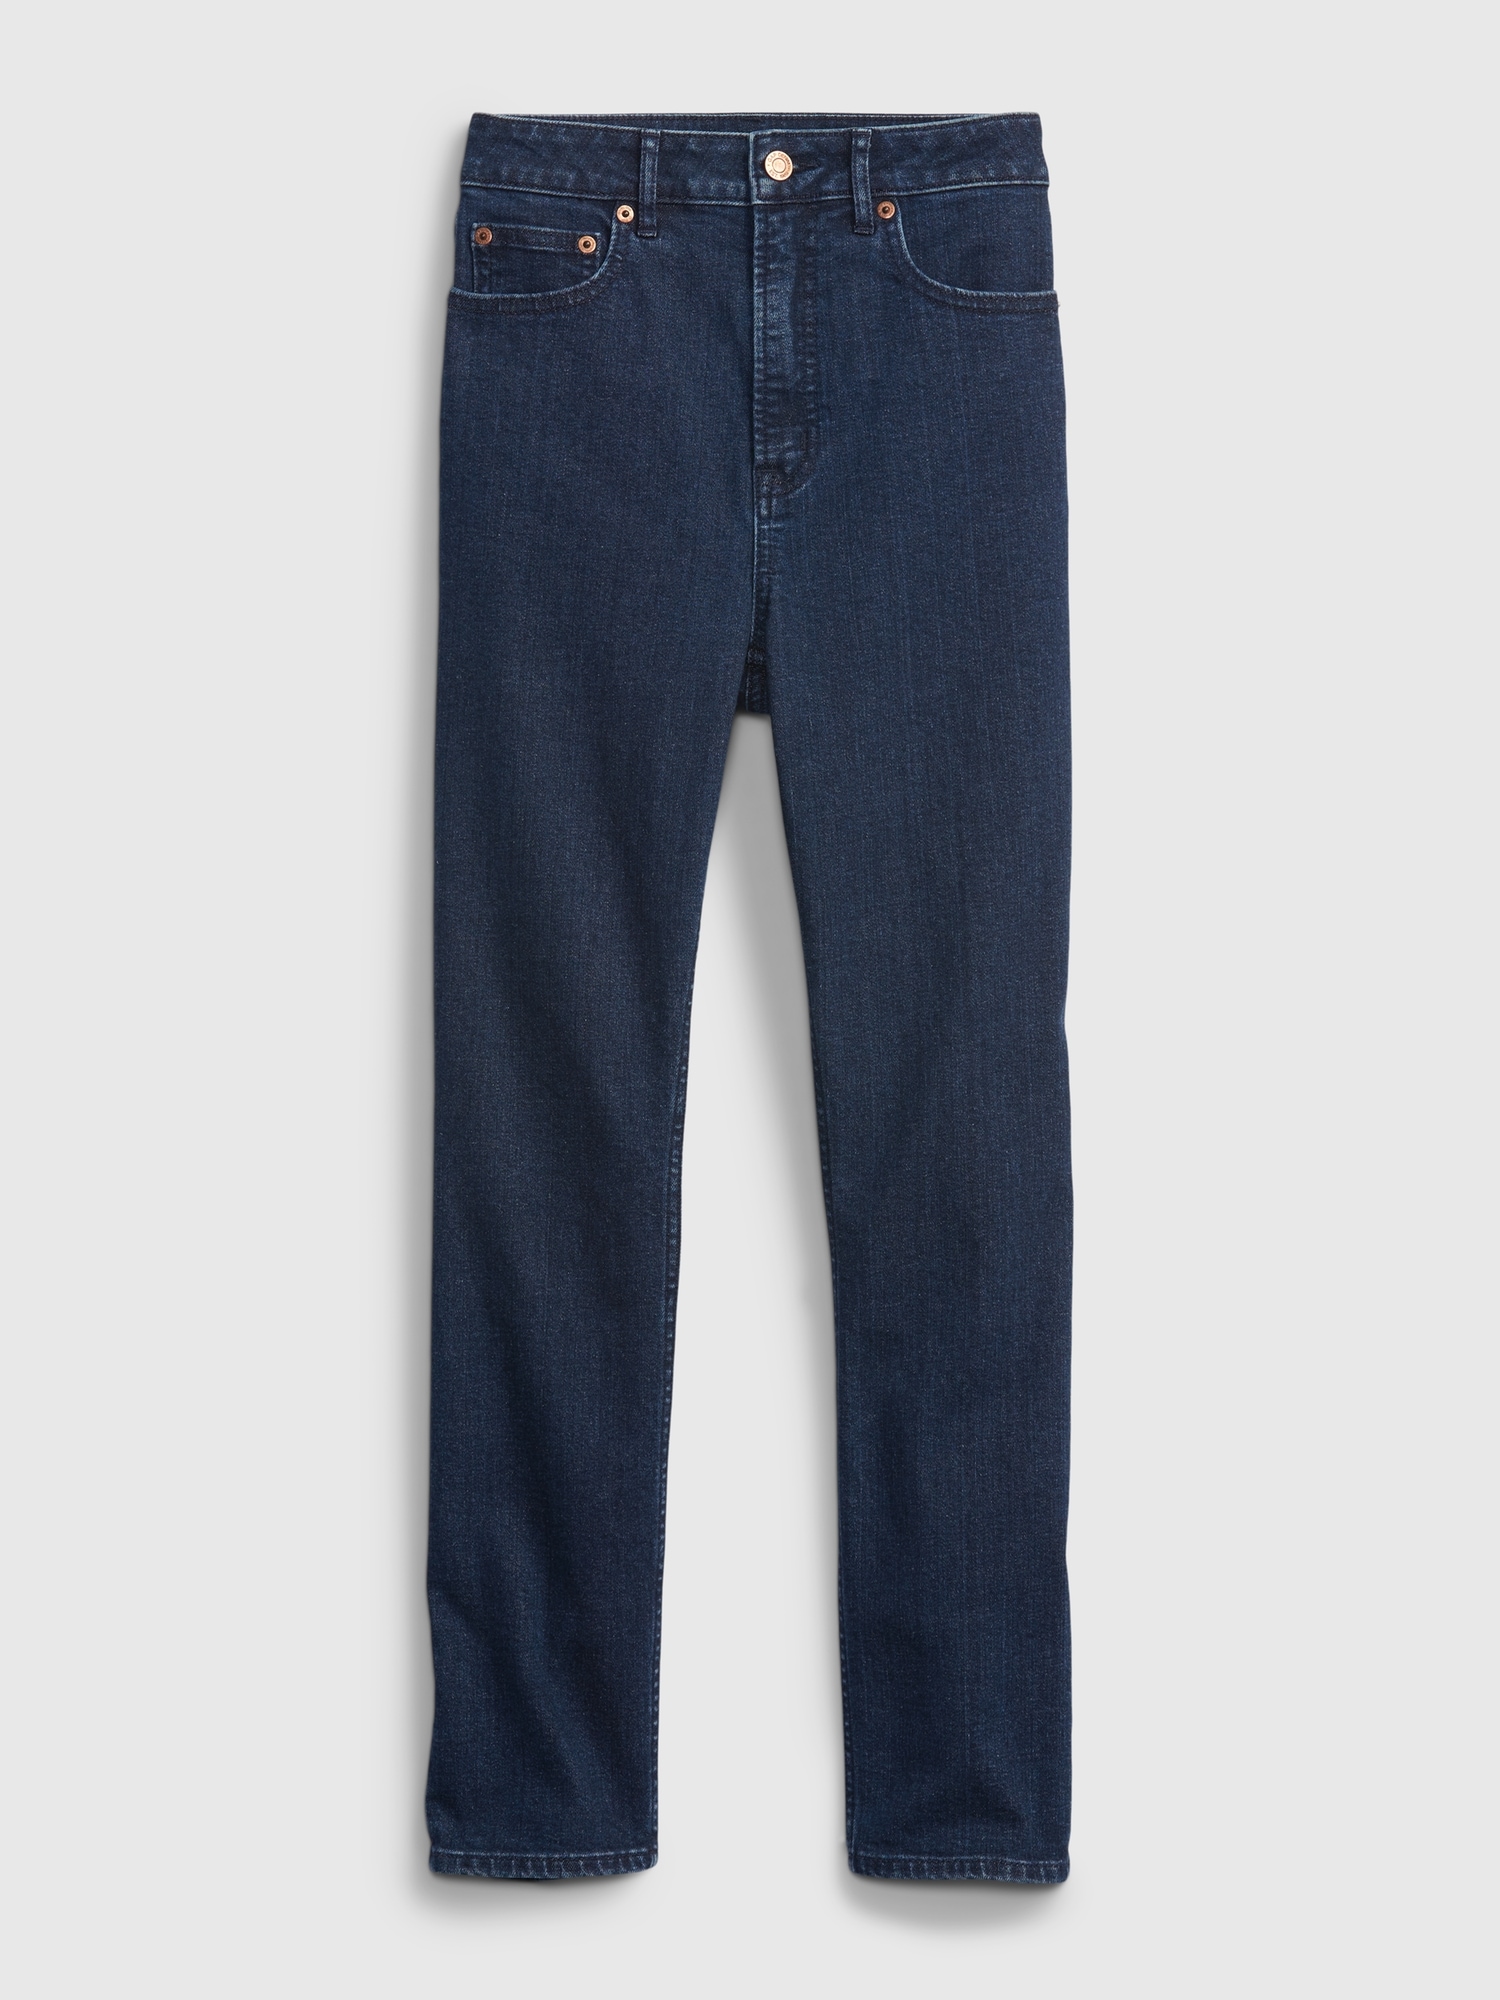 Sky High Rise Vintage Slim Jeans with Washwell | Gap